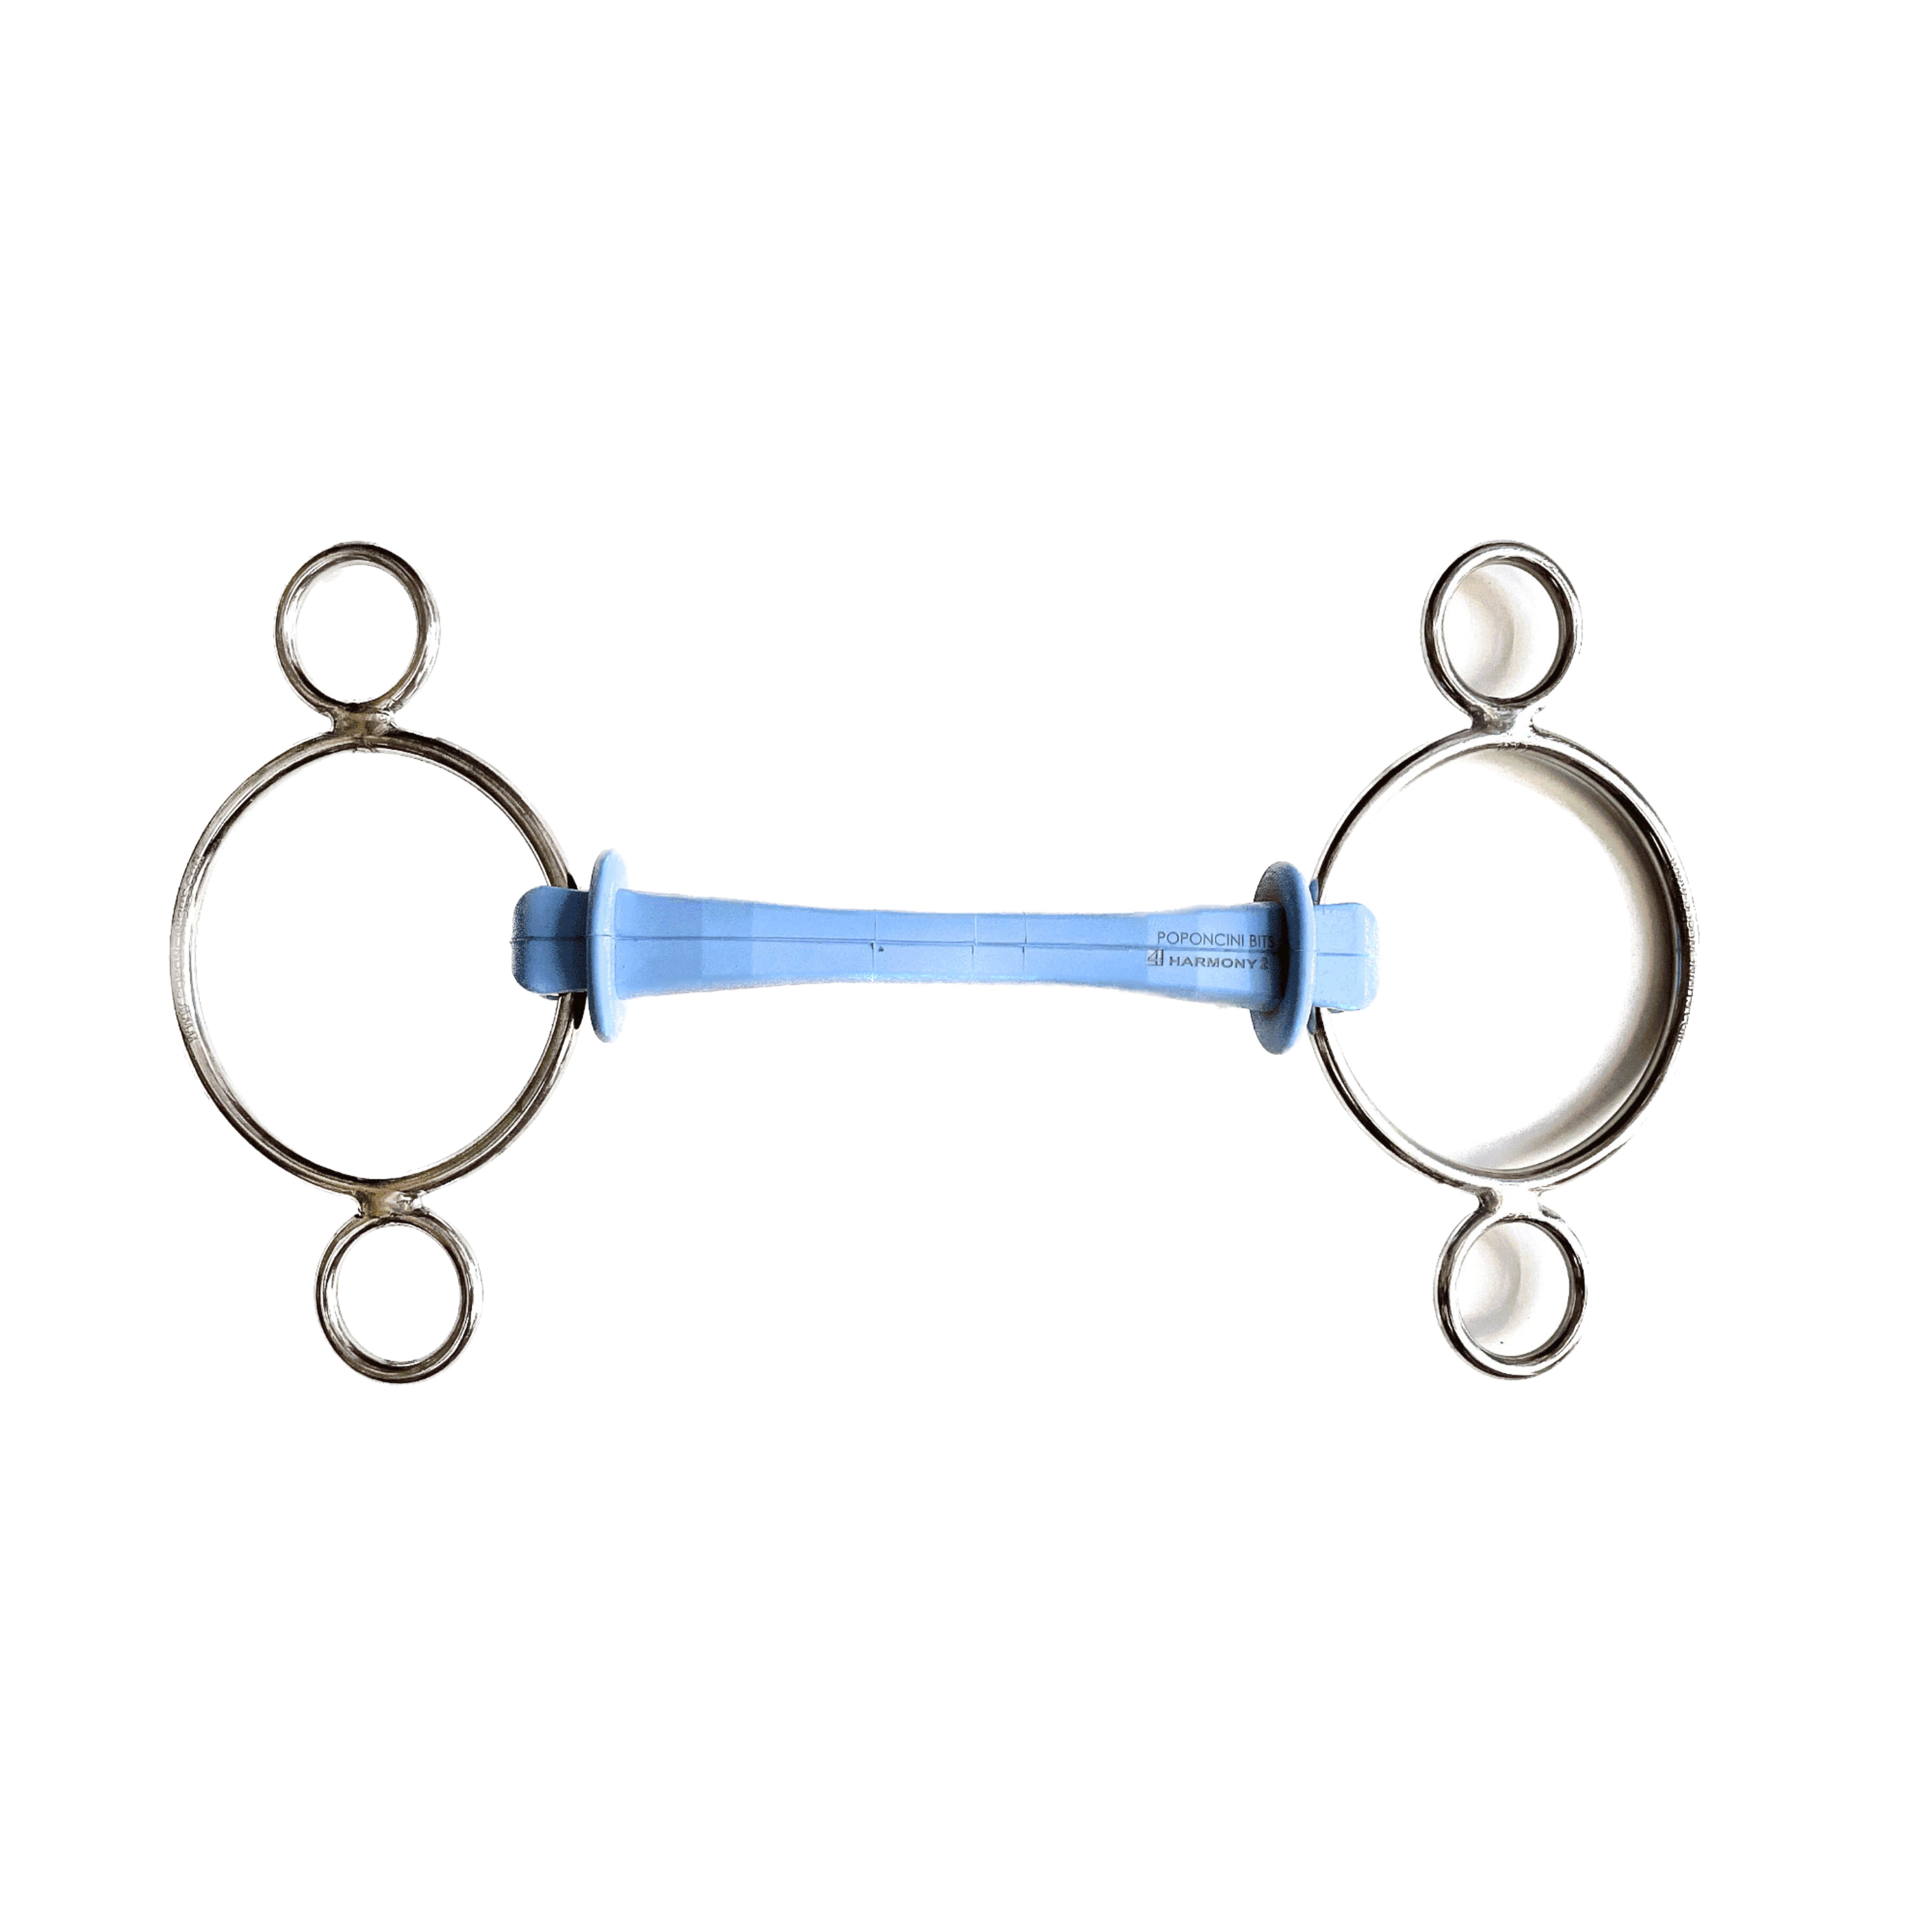 Poponcini PSS 2-ring Snaffle